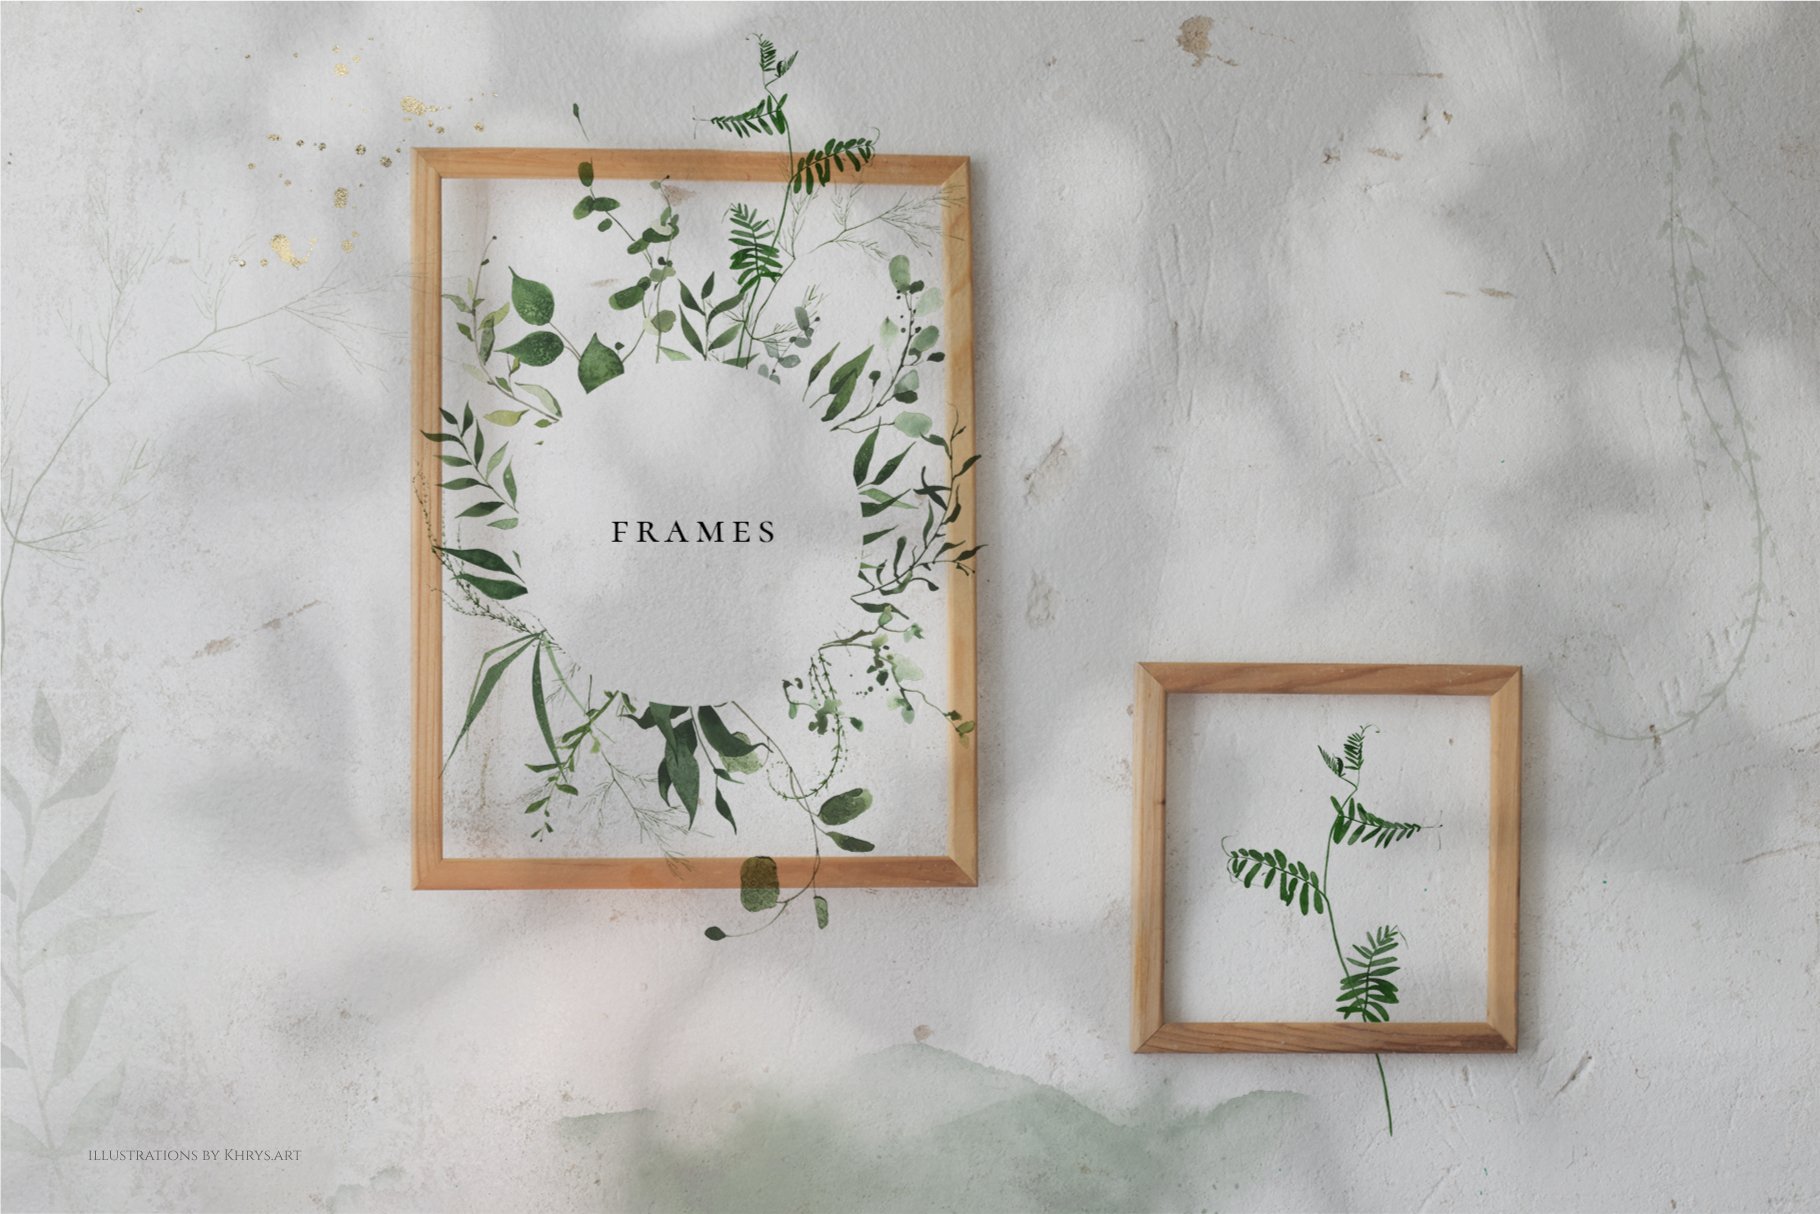 Picture of a frame with a picture of a plant on it.